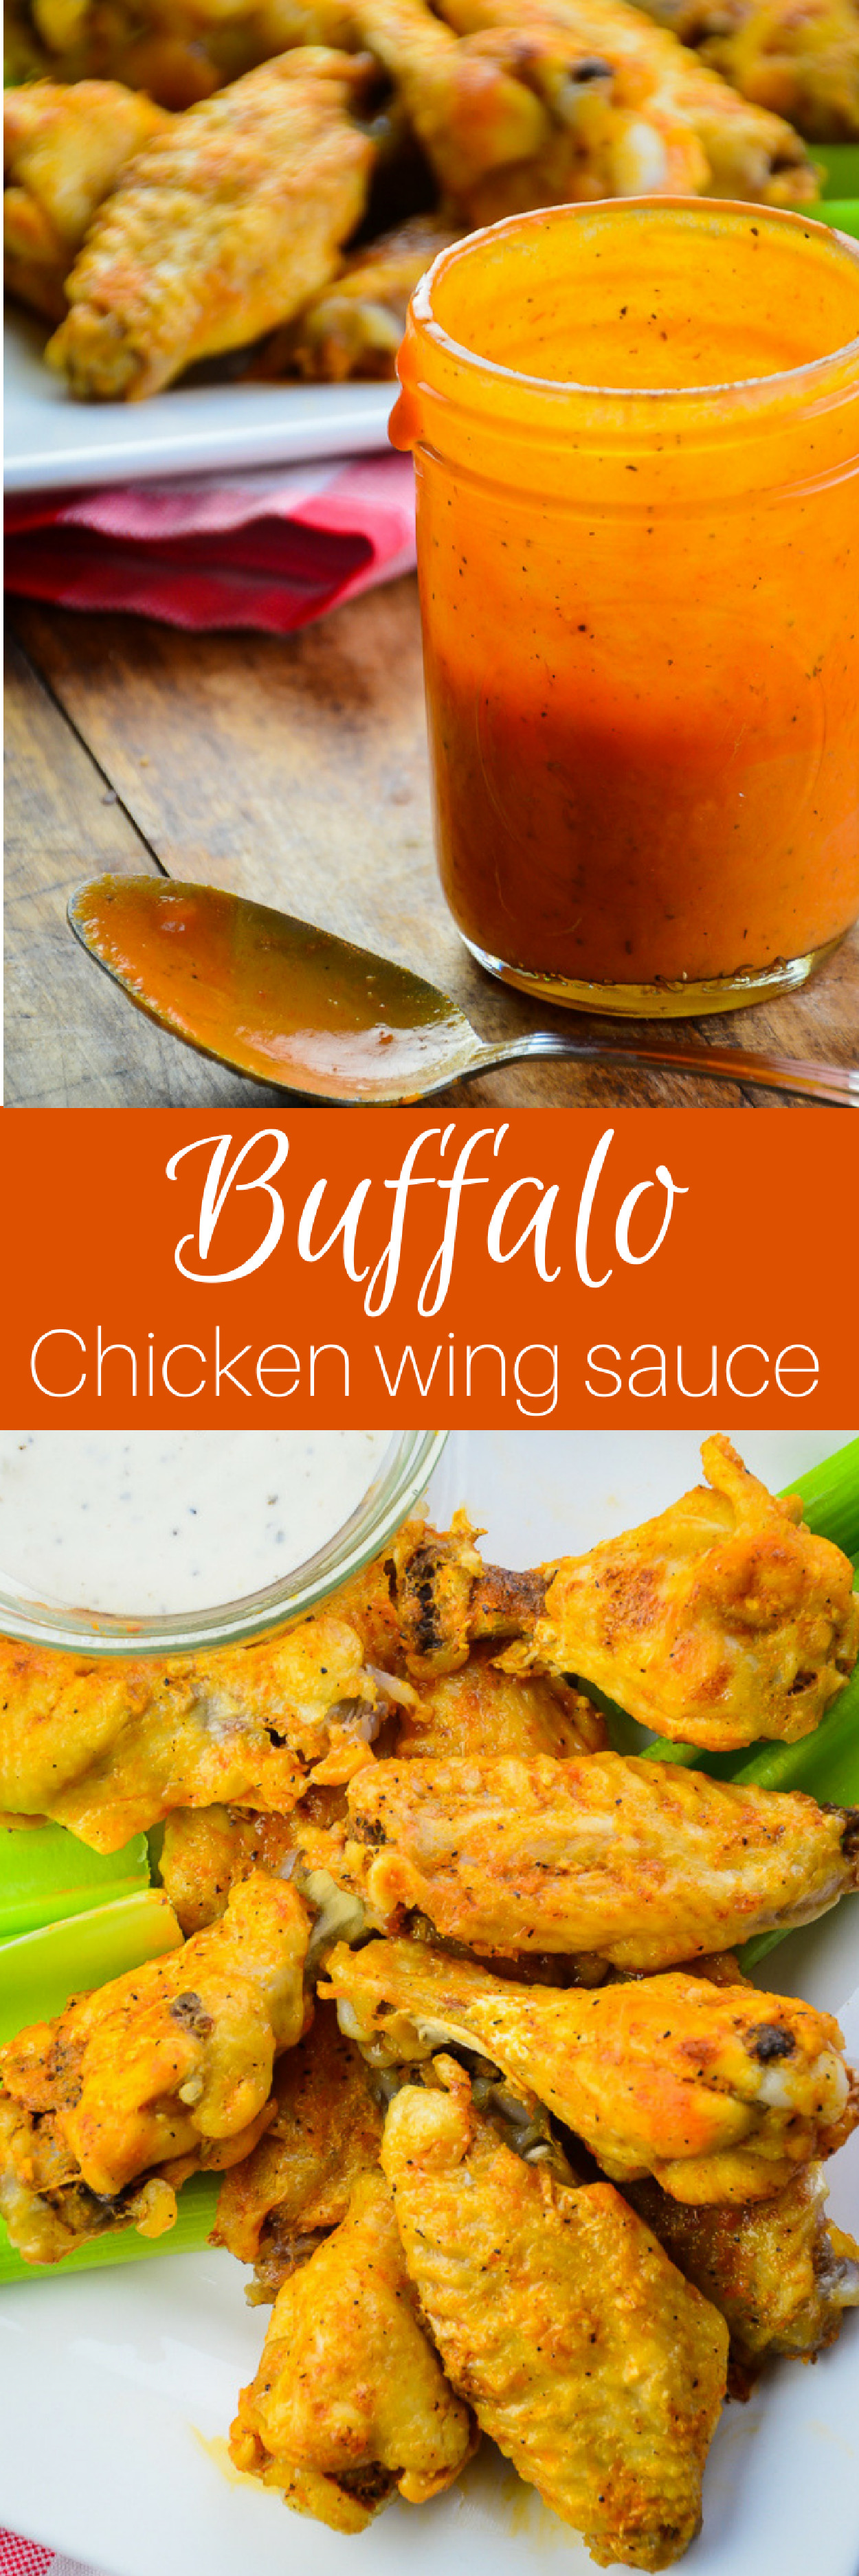 Chicken Wing Sauces
 Buffalo Chicken Wing Sauce